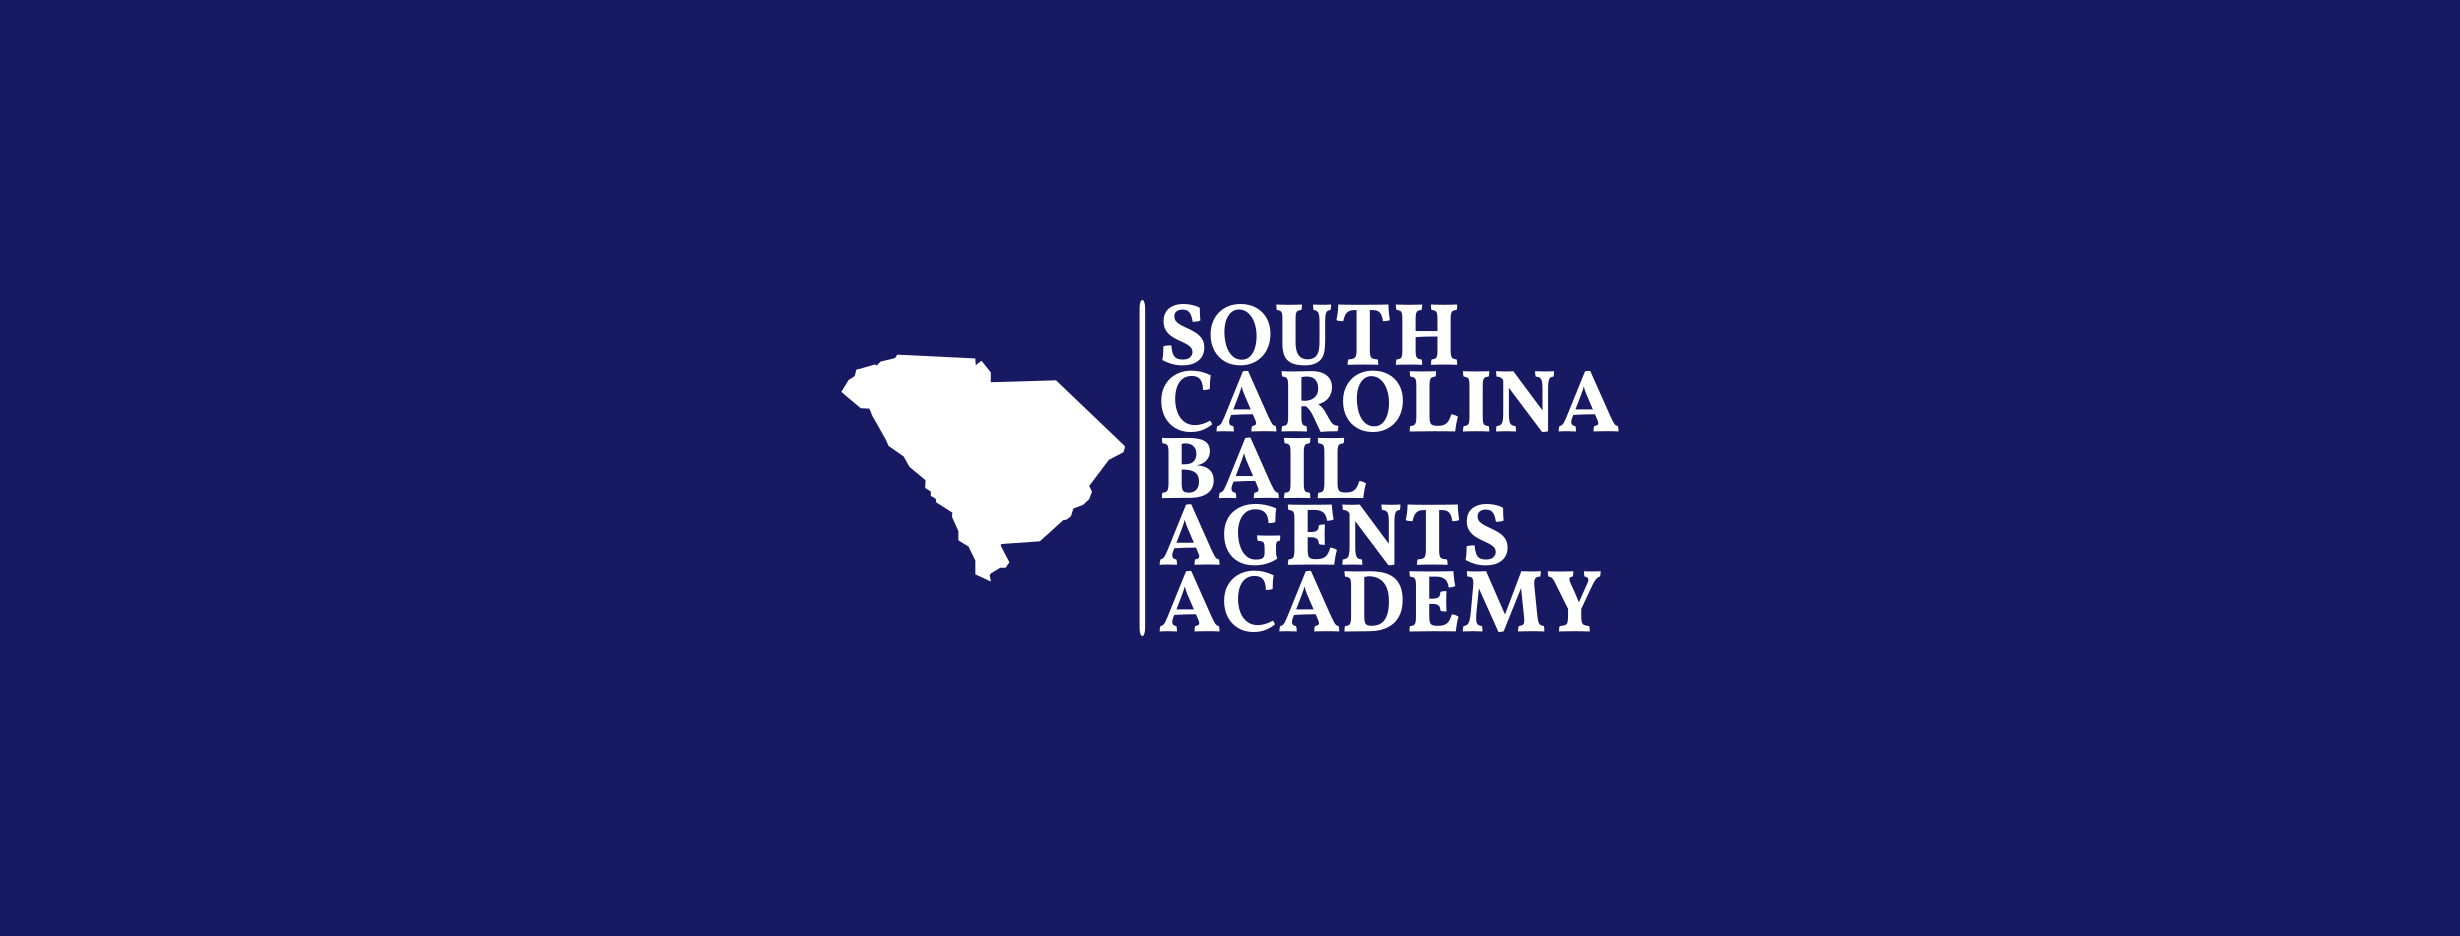 FB Cover south-carolina-bail-agents-academy-facebook-cover-photo.png